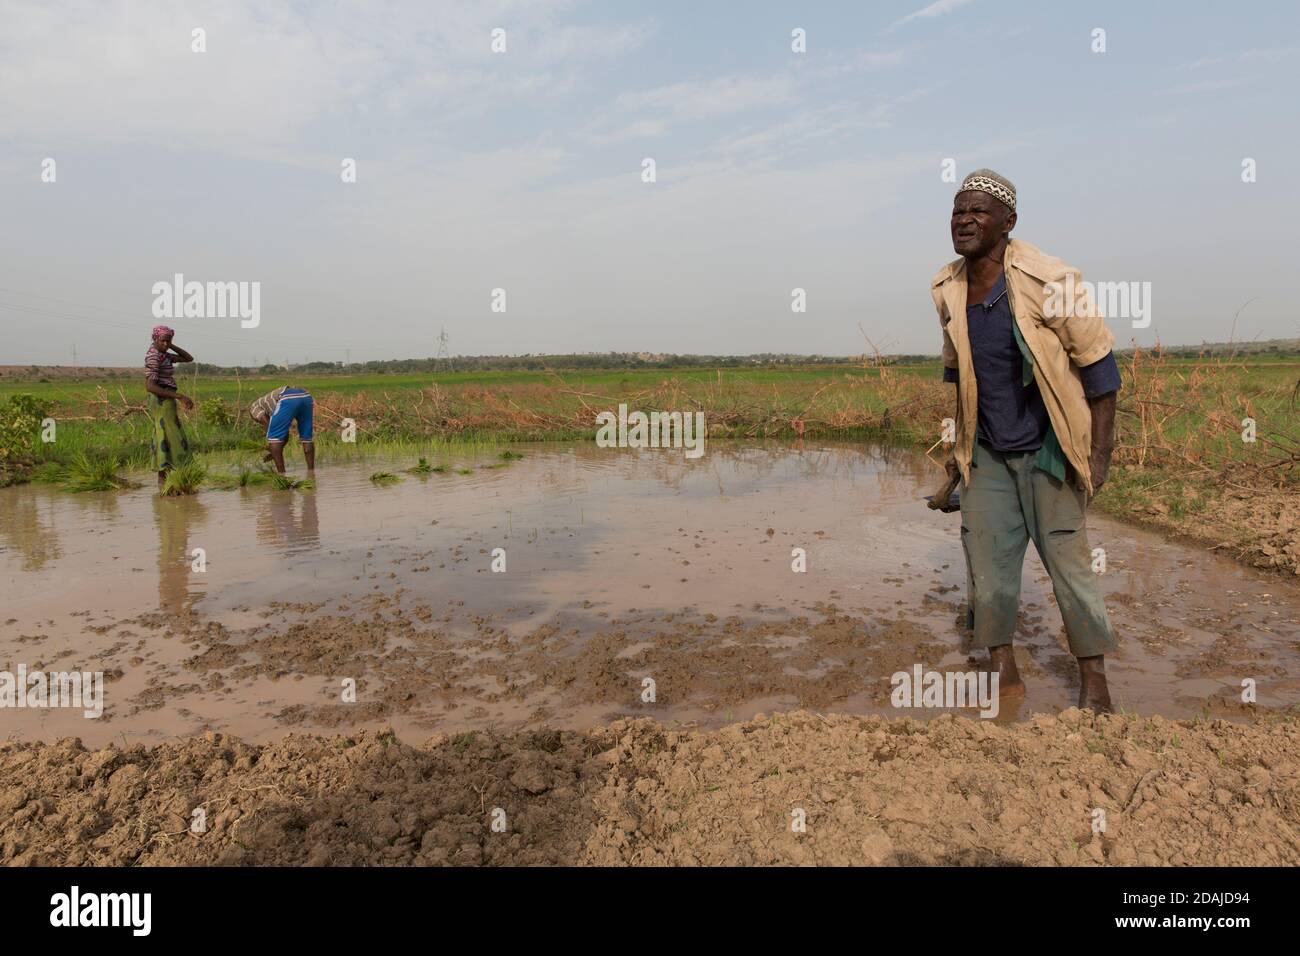 Selingue, Mali, 26th April 2015; Diola Coulibaly, 79, retired army man, working on his plot of 0.04 hectares.  The land was a garden plot but he has changed it to grow rice.  He also has one hectare of rice in another part of Selingue. His son, Moussa Coulibaly, 19, and his wife Mamou Coulibaly, 18, are working with him.  Diola has an army pension and his sons do most of the work.  The family share all the produce of the farming between them. Moussa works full-time on the land. Diola has two wives and 8 children. Stock Photo